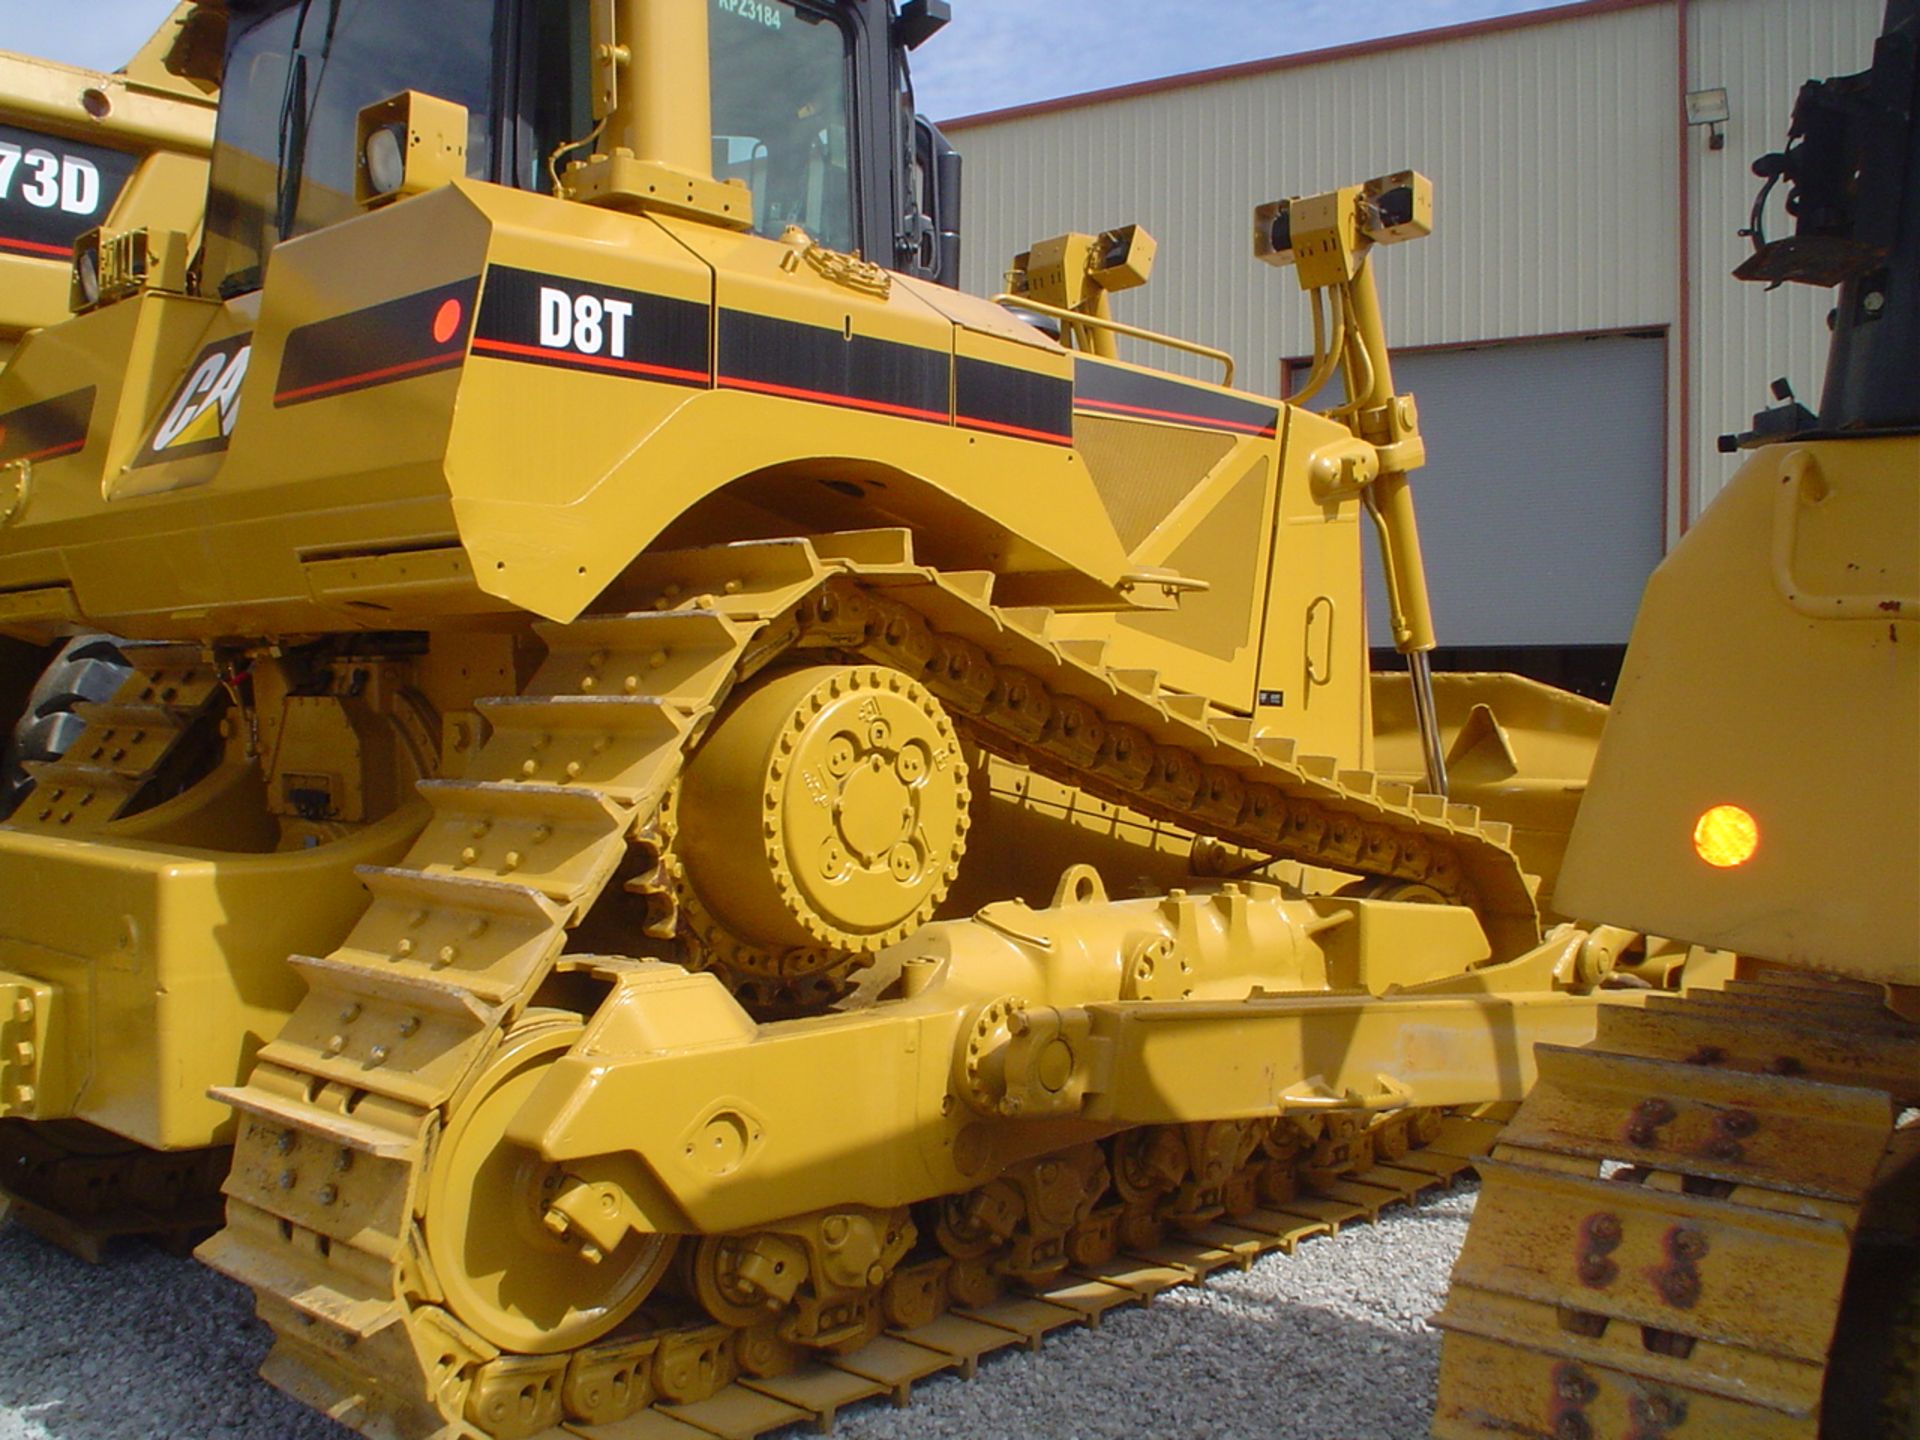 2009 CATERPILLAR D8T CRAWLER TRACTOR, ENCLOSED CAB, 24'' WIDE PADS, 12-1/2' U-SHAPED BLADE, NEW - Image 4 of 4